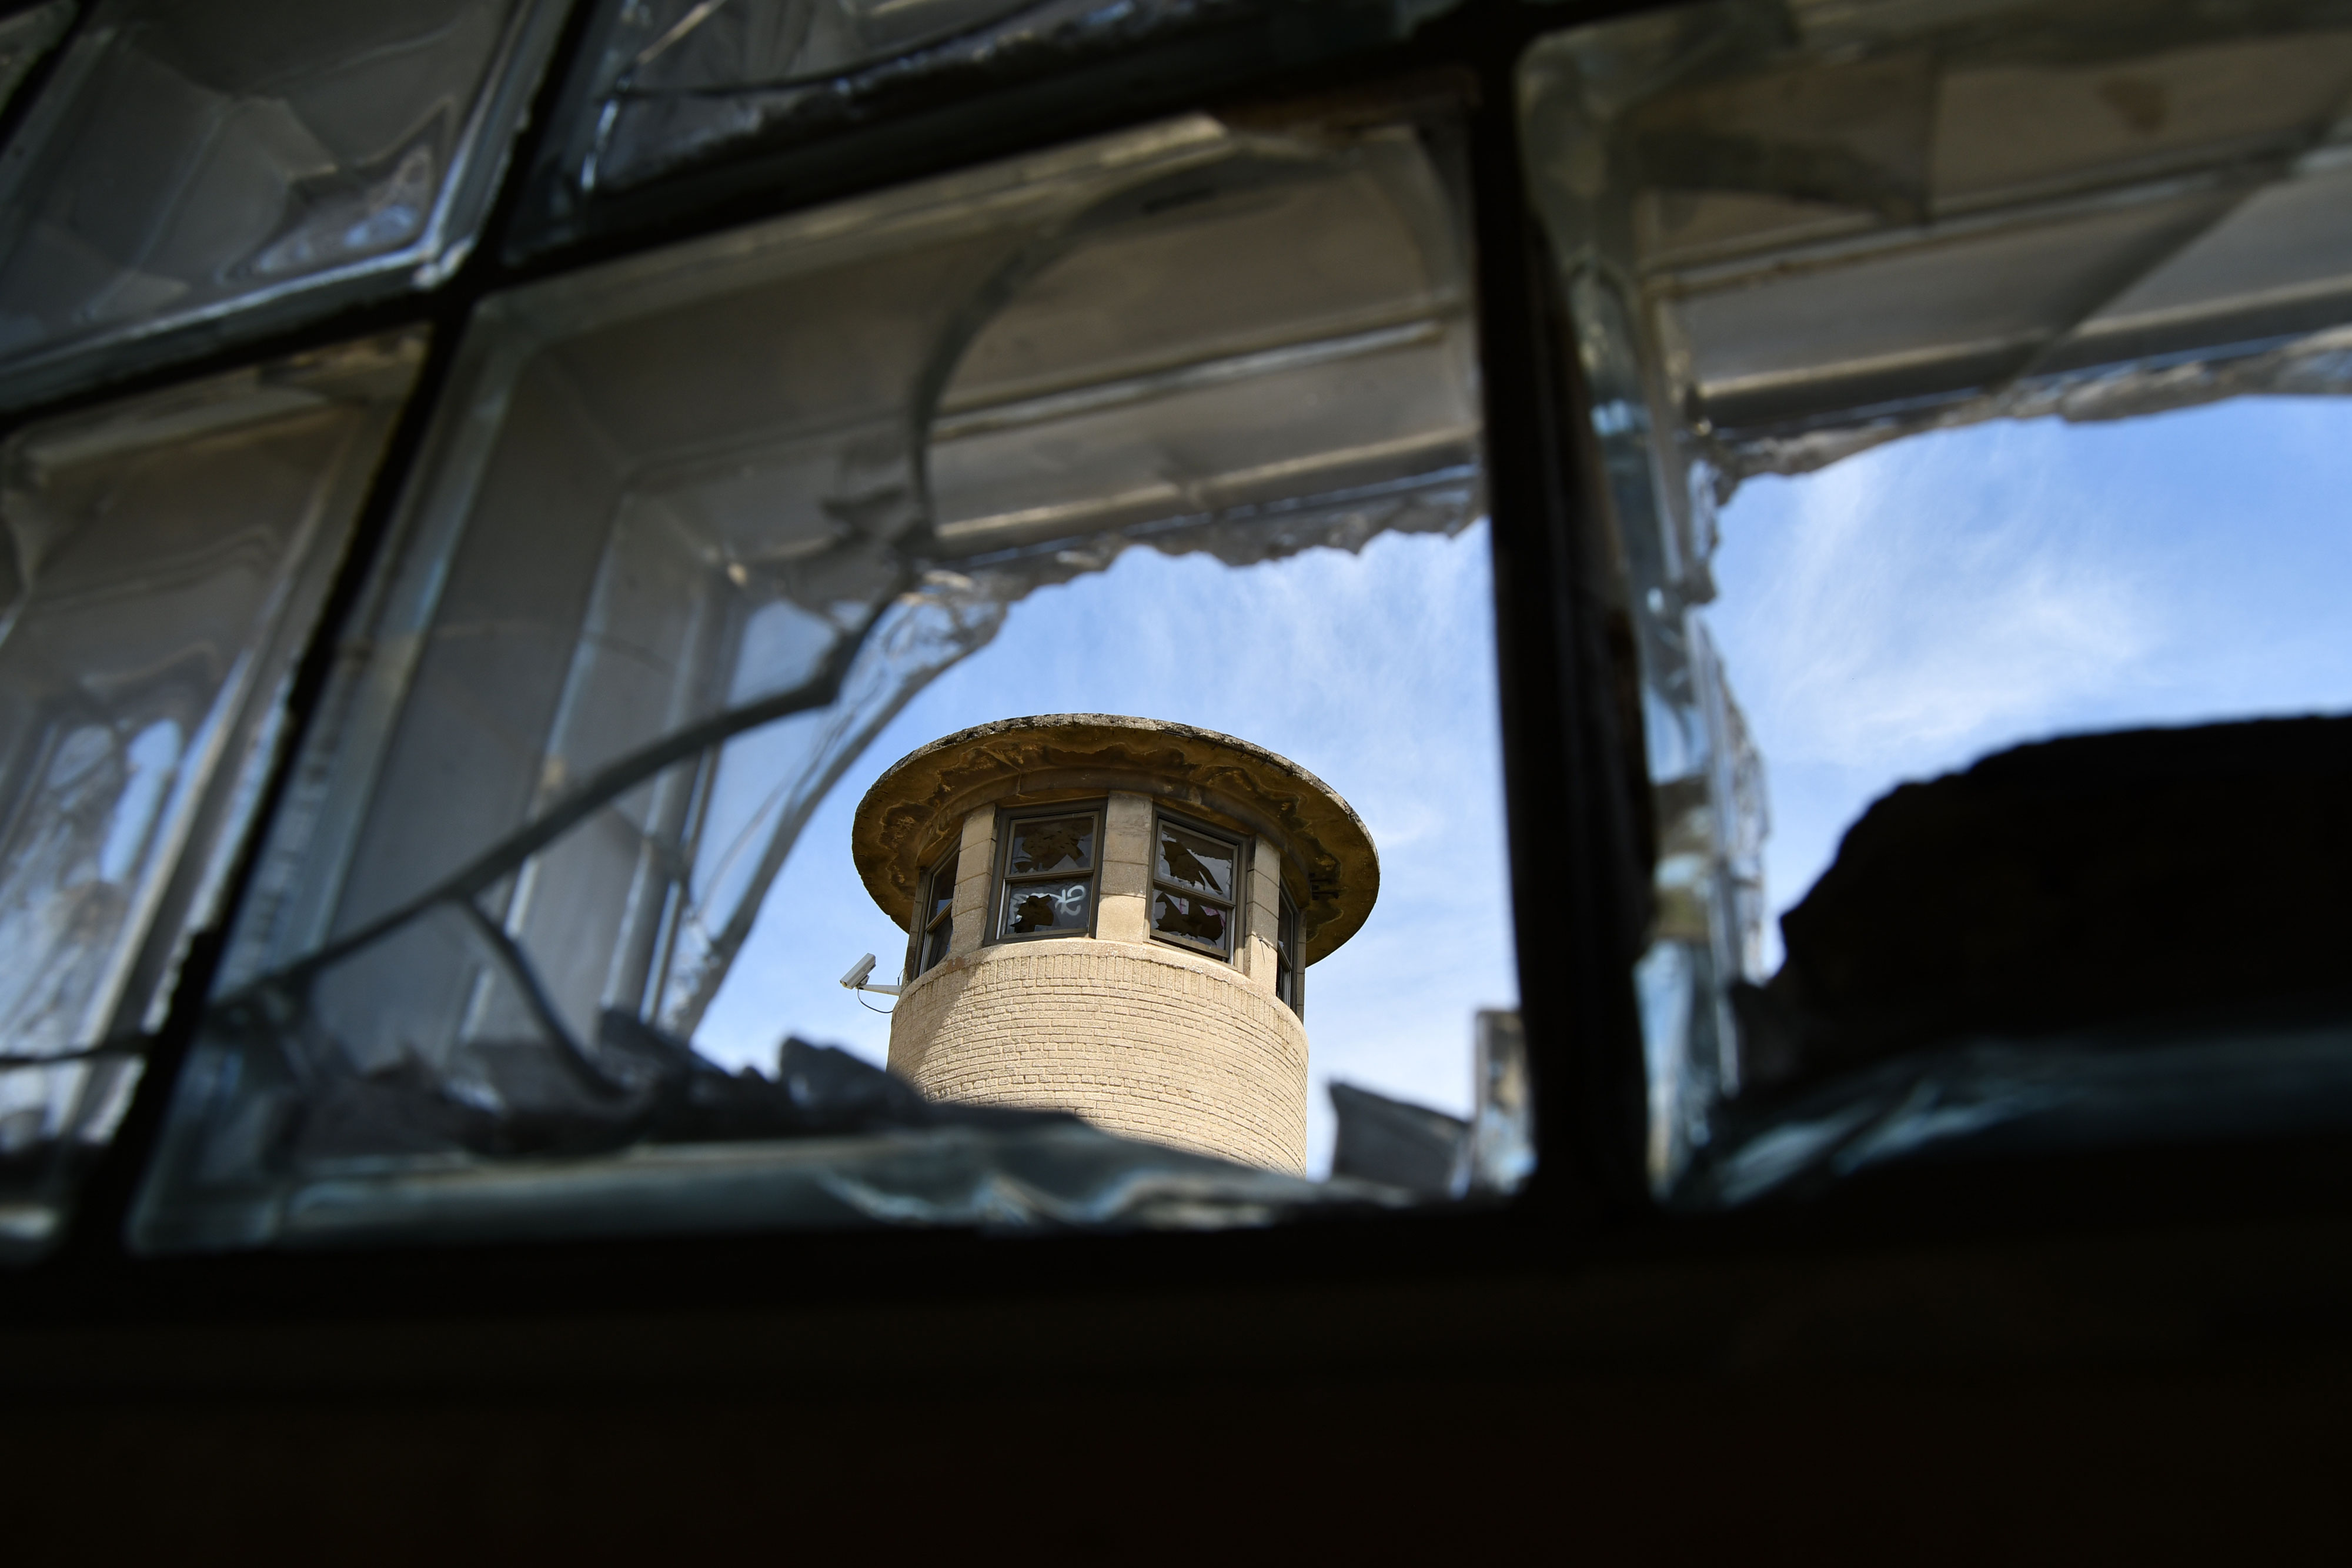 View of the vandalized windows at the prison.